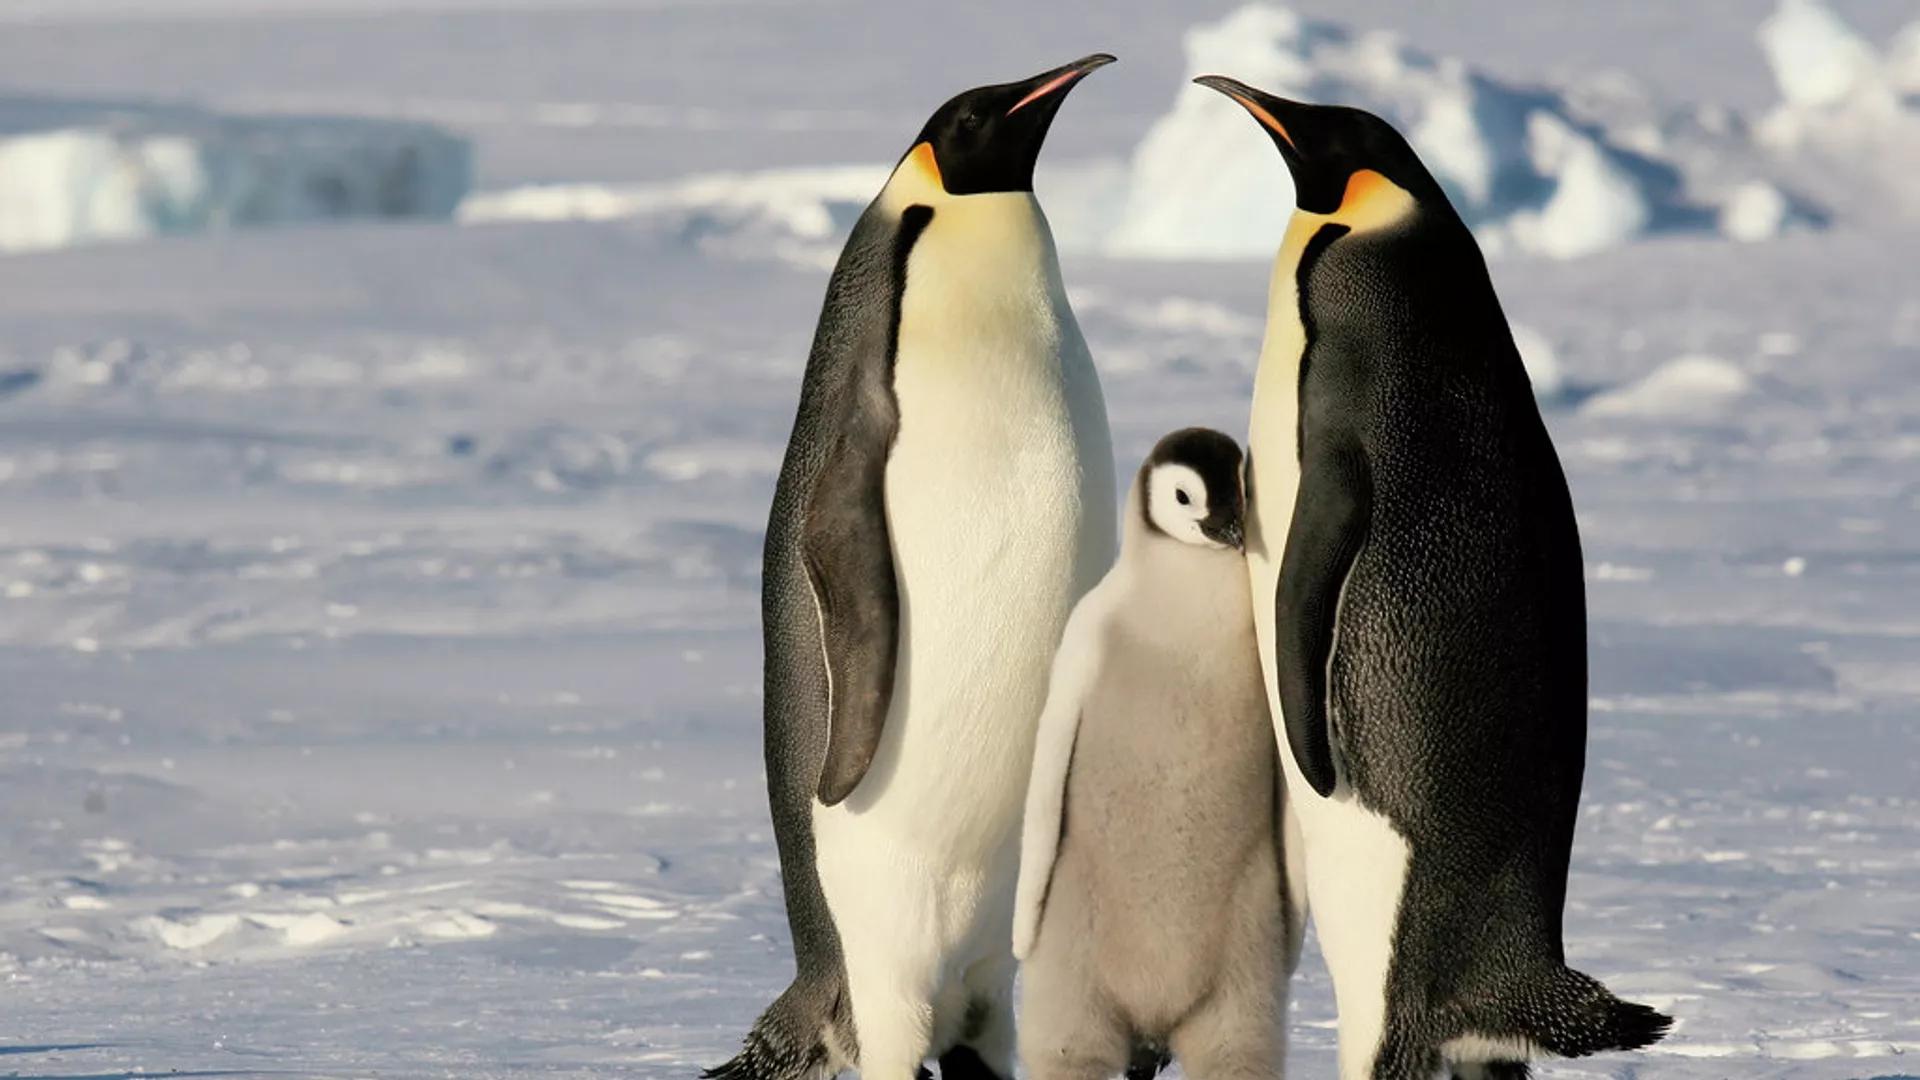 Scientists Discover New Penguin Colony in Antarctica Using Satellite Imagery